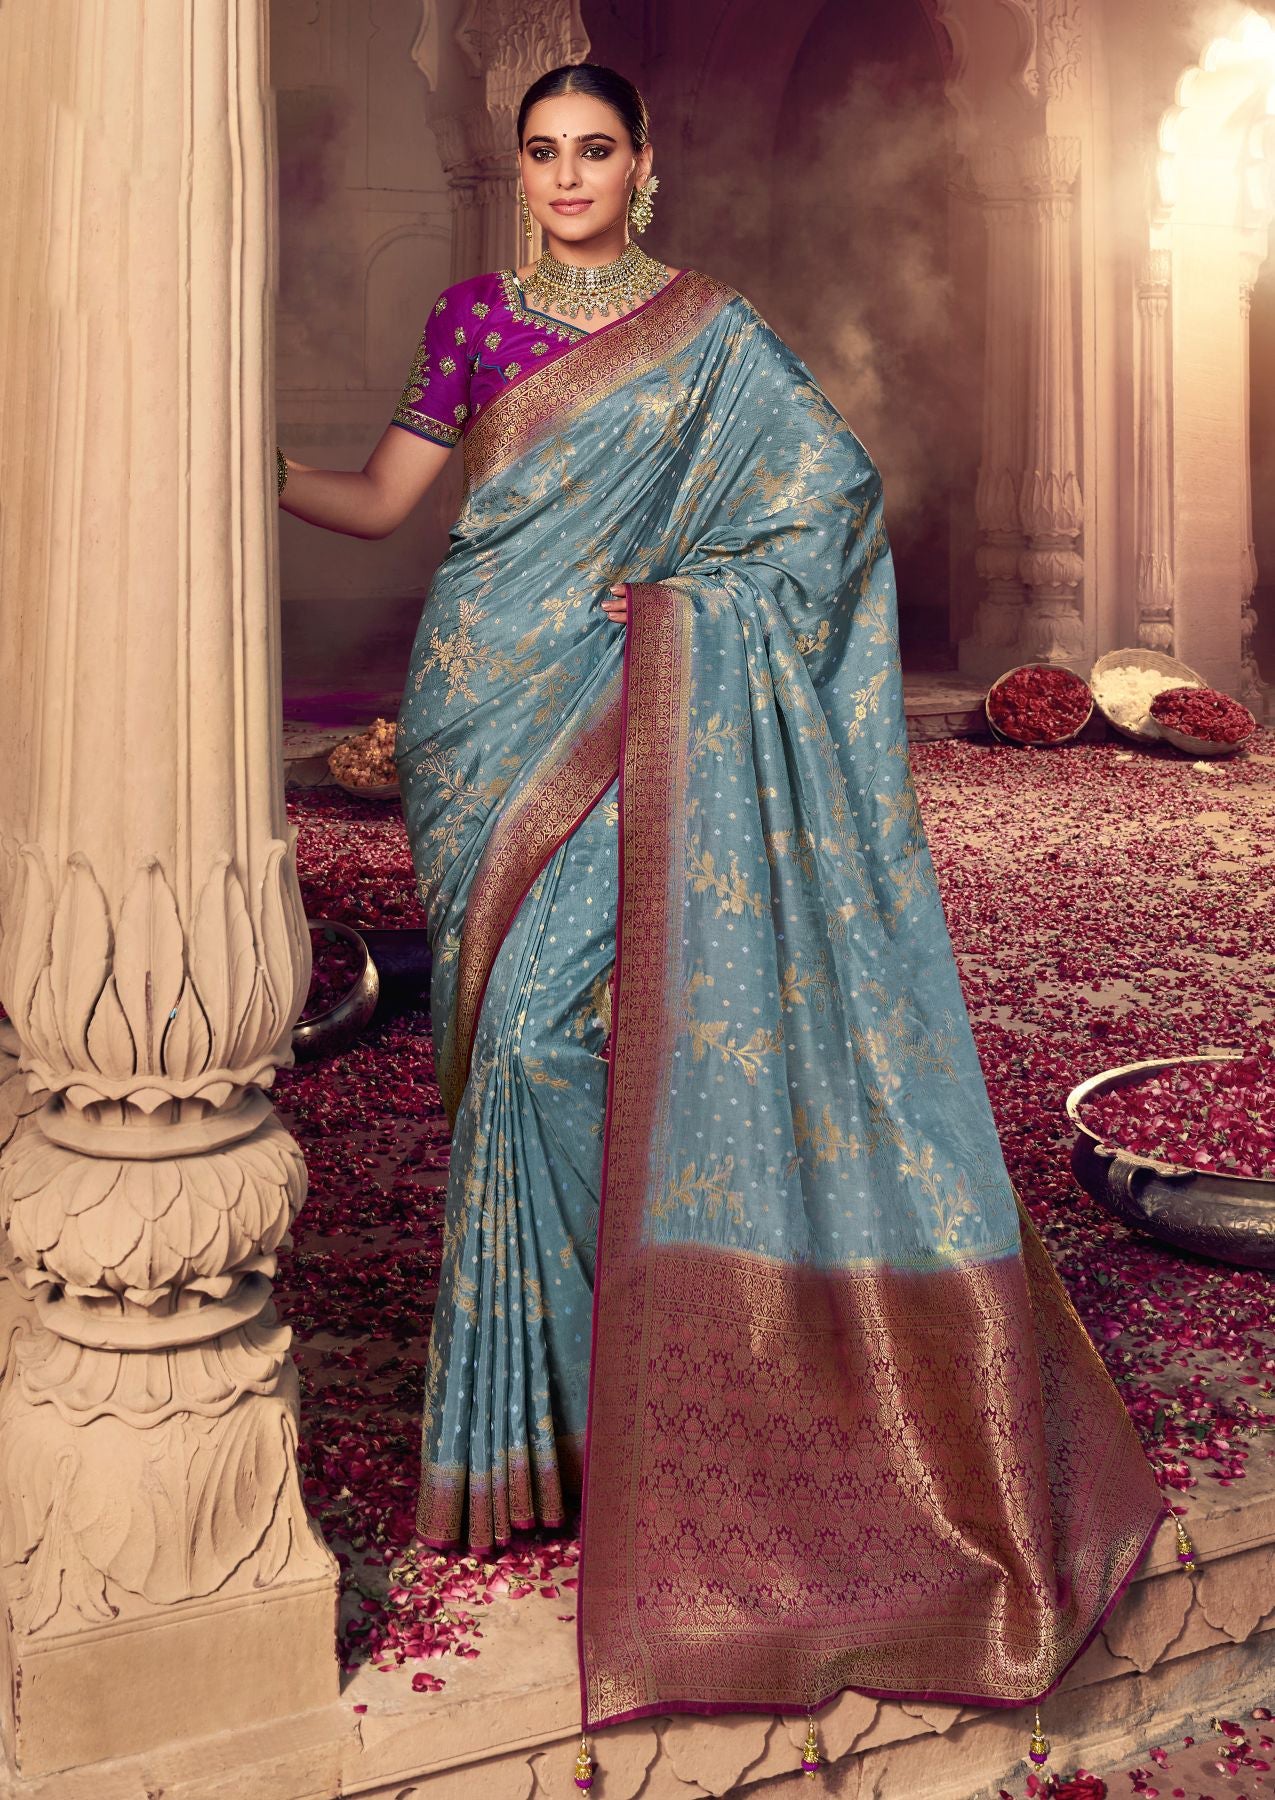 Ice Blue Elegance: Dola Silk Saree Draped in Sublime Beauty and Grace